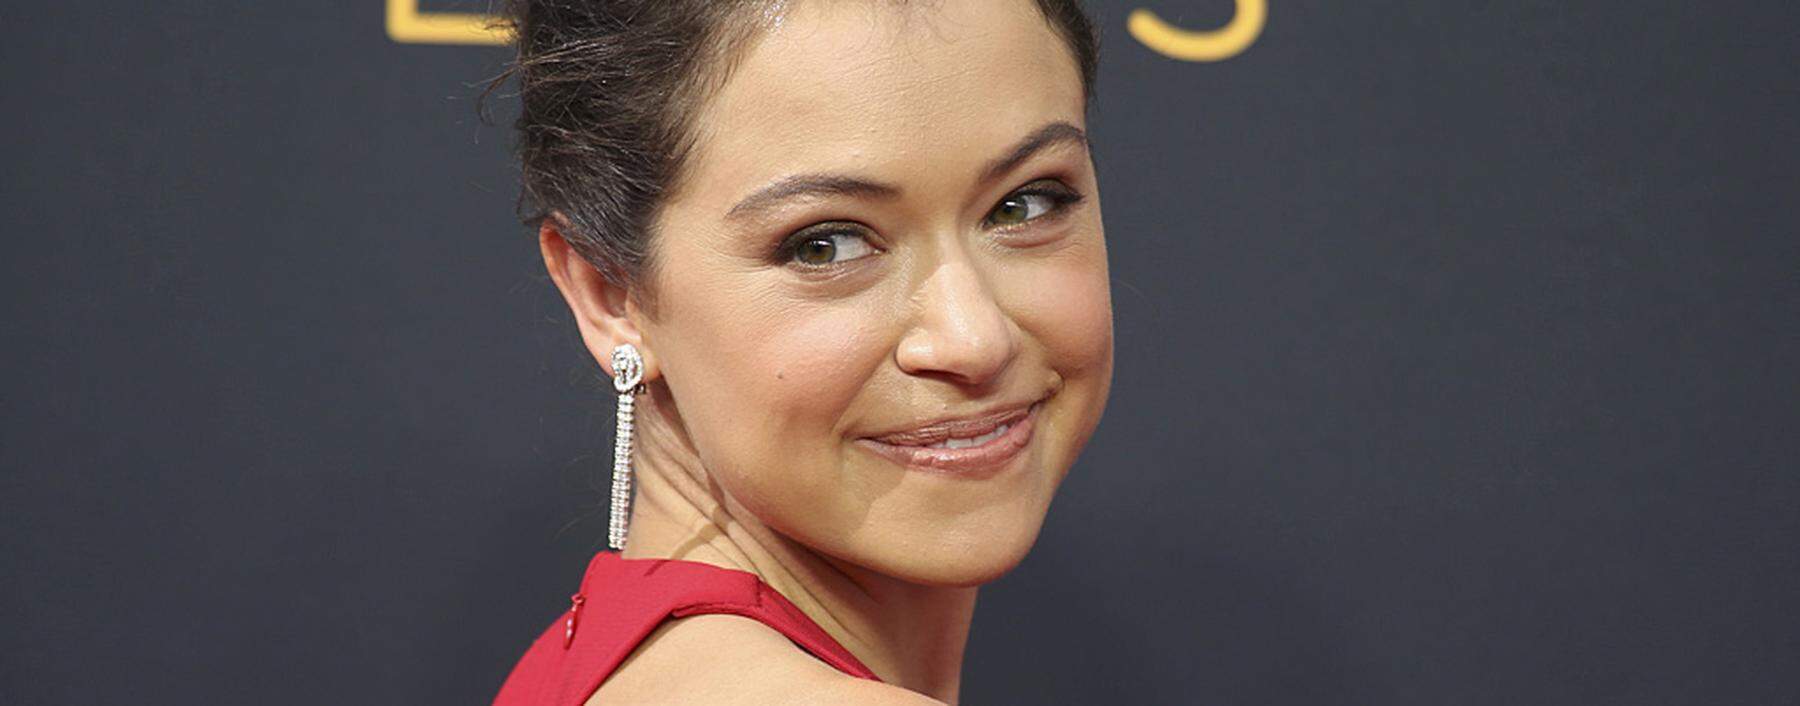 Actress Tatiana Maslany from the BBC series ´Orphan Black´ arrives at the 68th Primetime Emmy Awards in Los Angeles, California